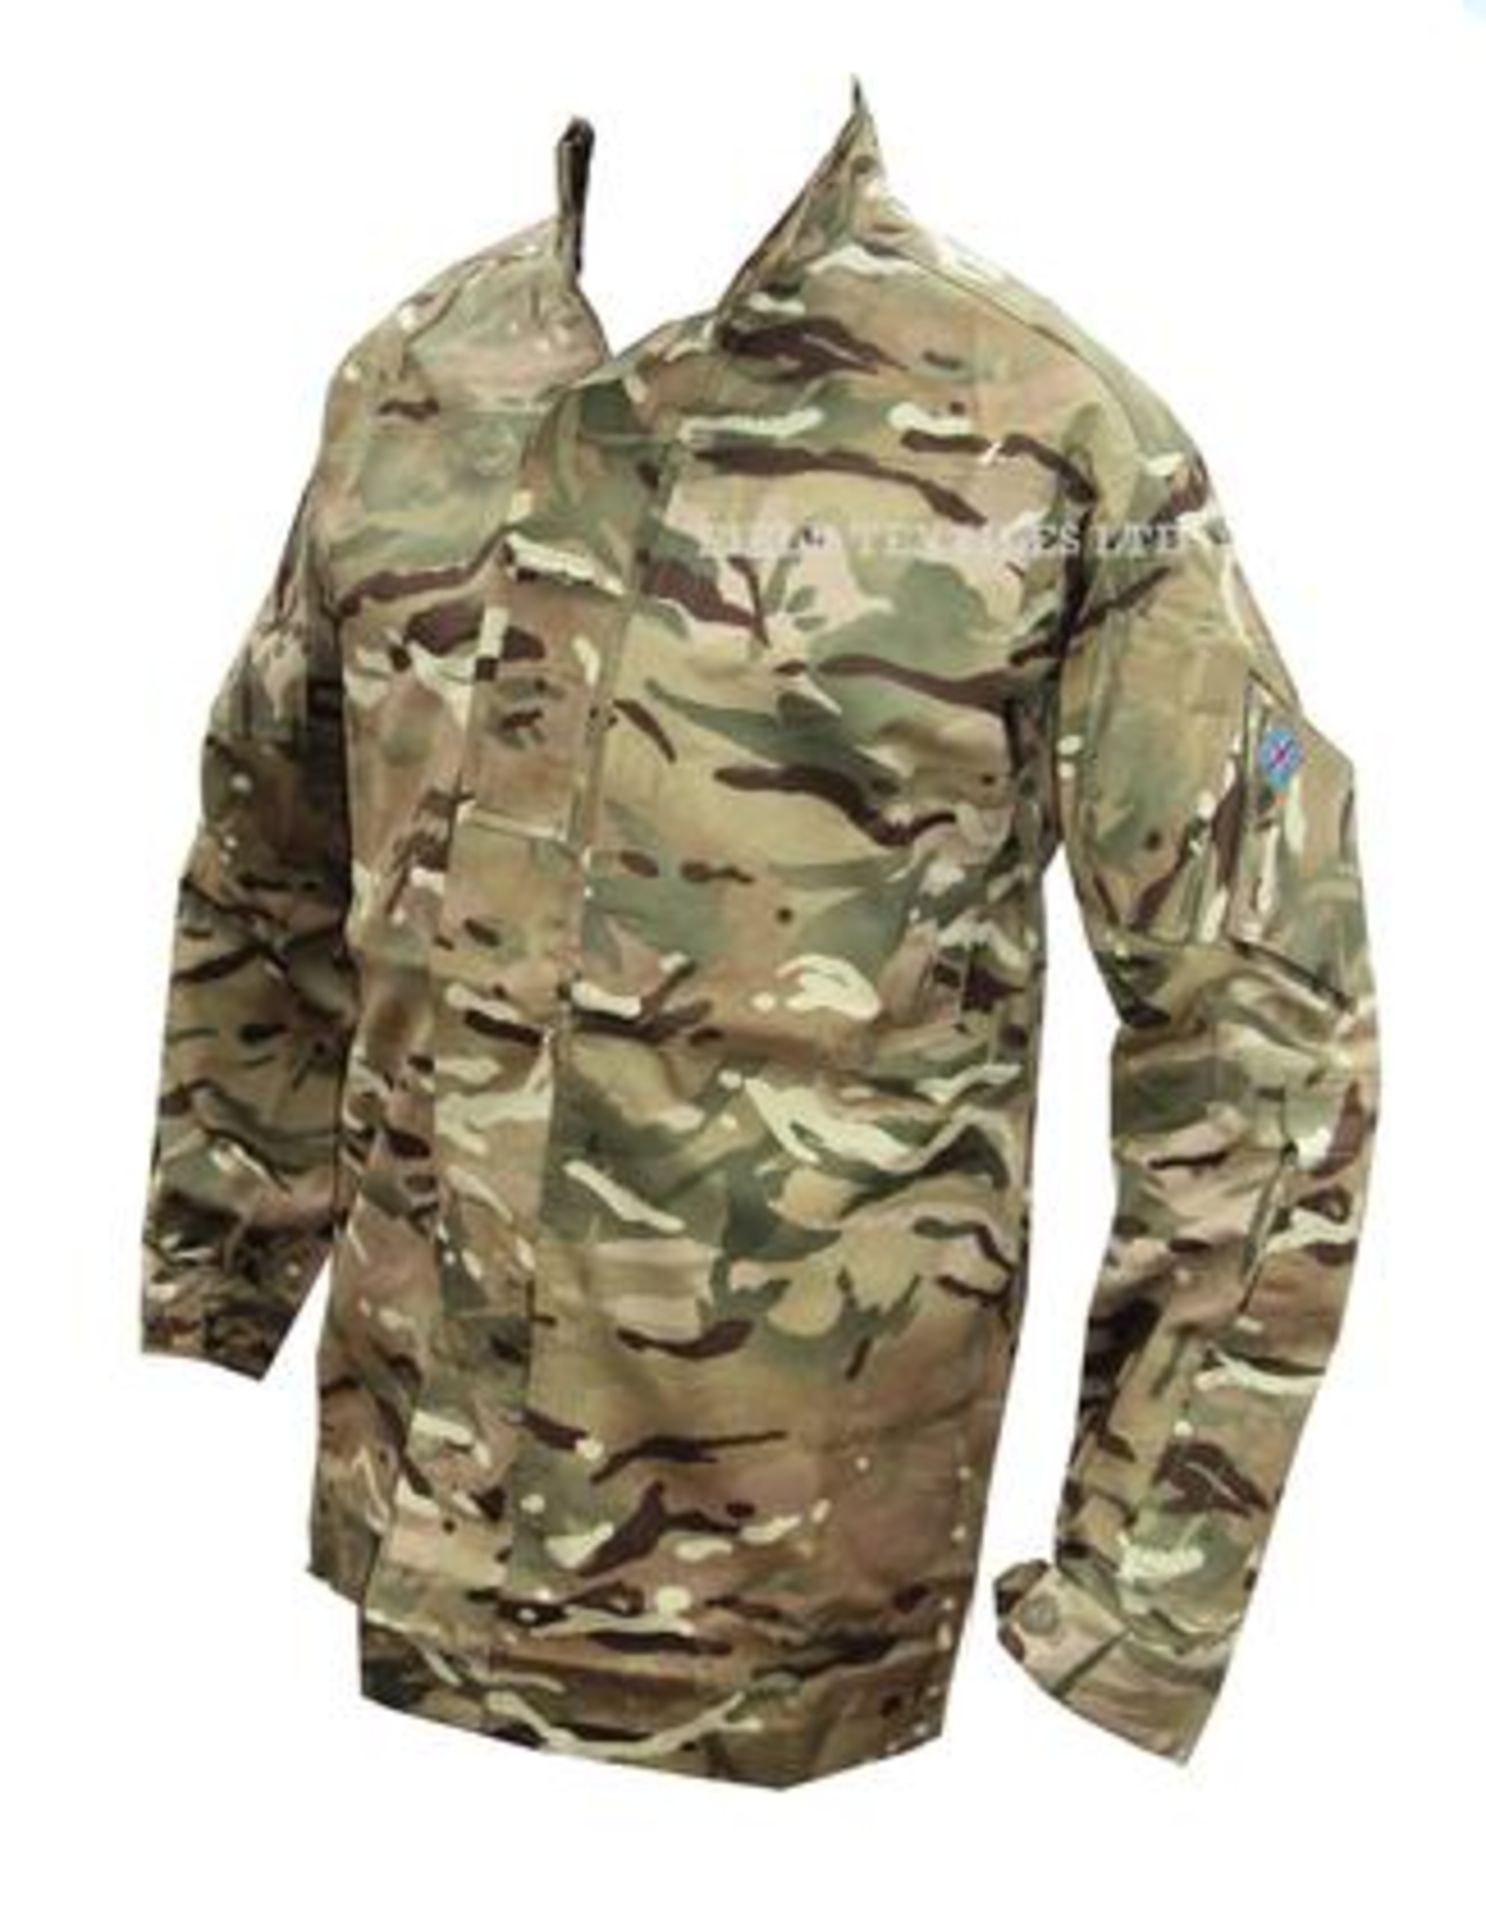 10 x Soldier 95 Shirts & 10 x MTP Jackets - Mix of Sizes - Grade 1 - Image 2 of 2